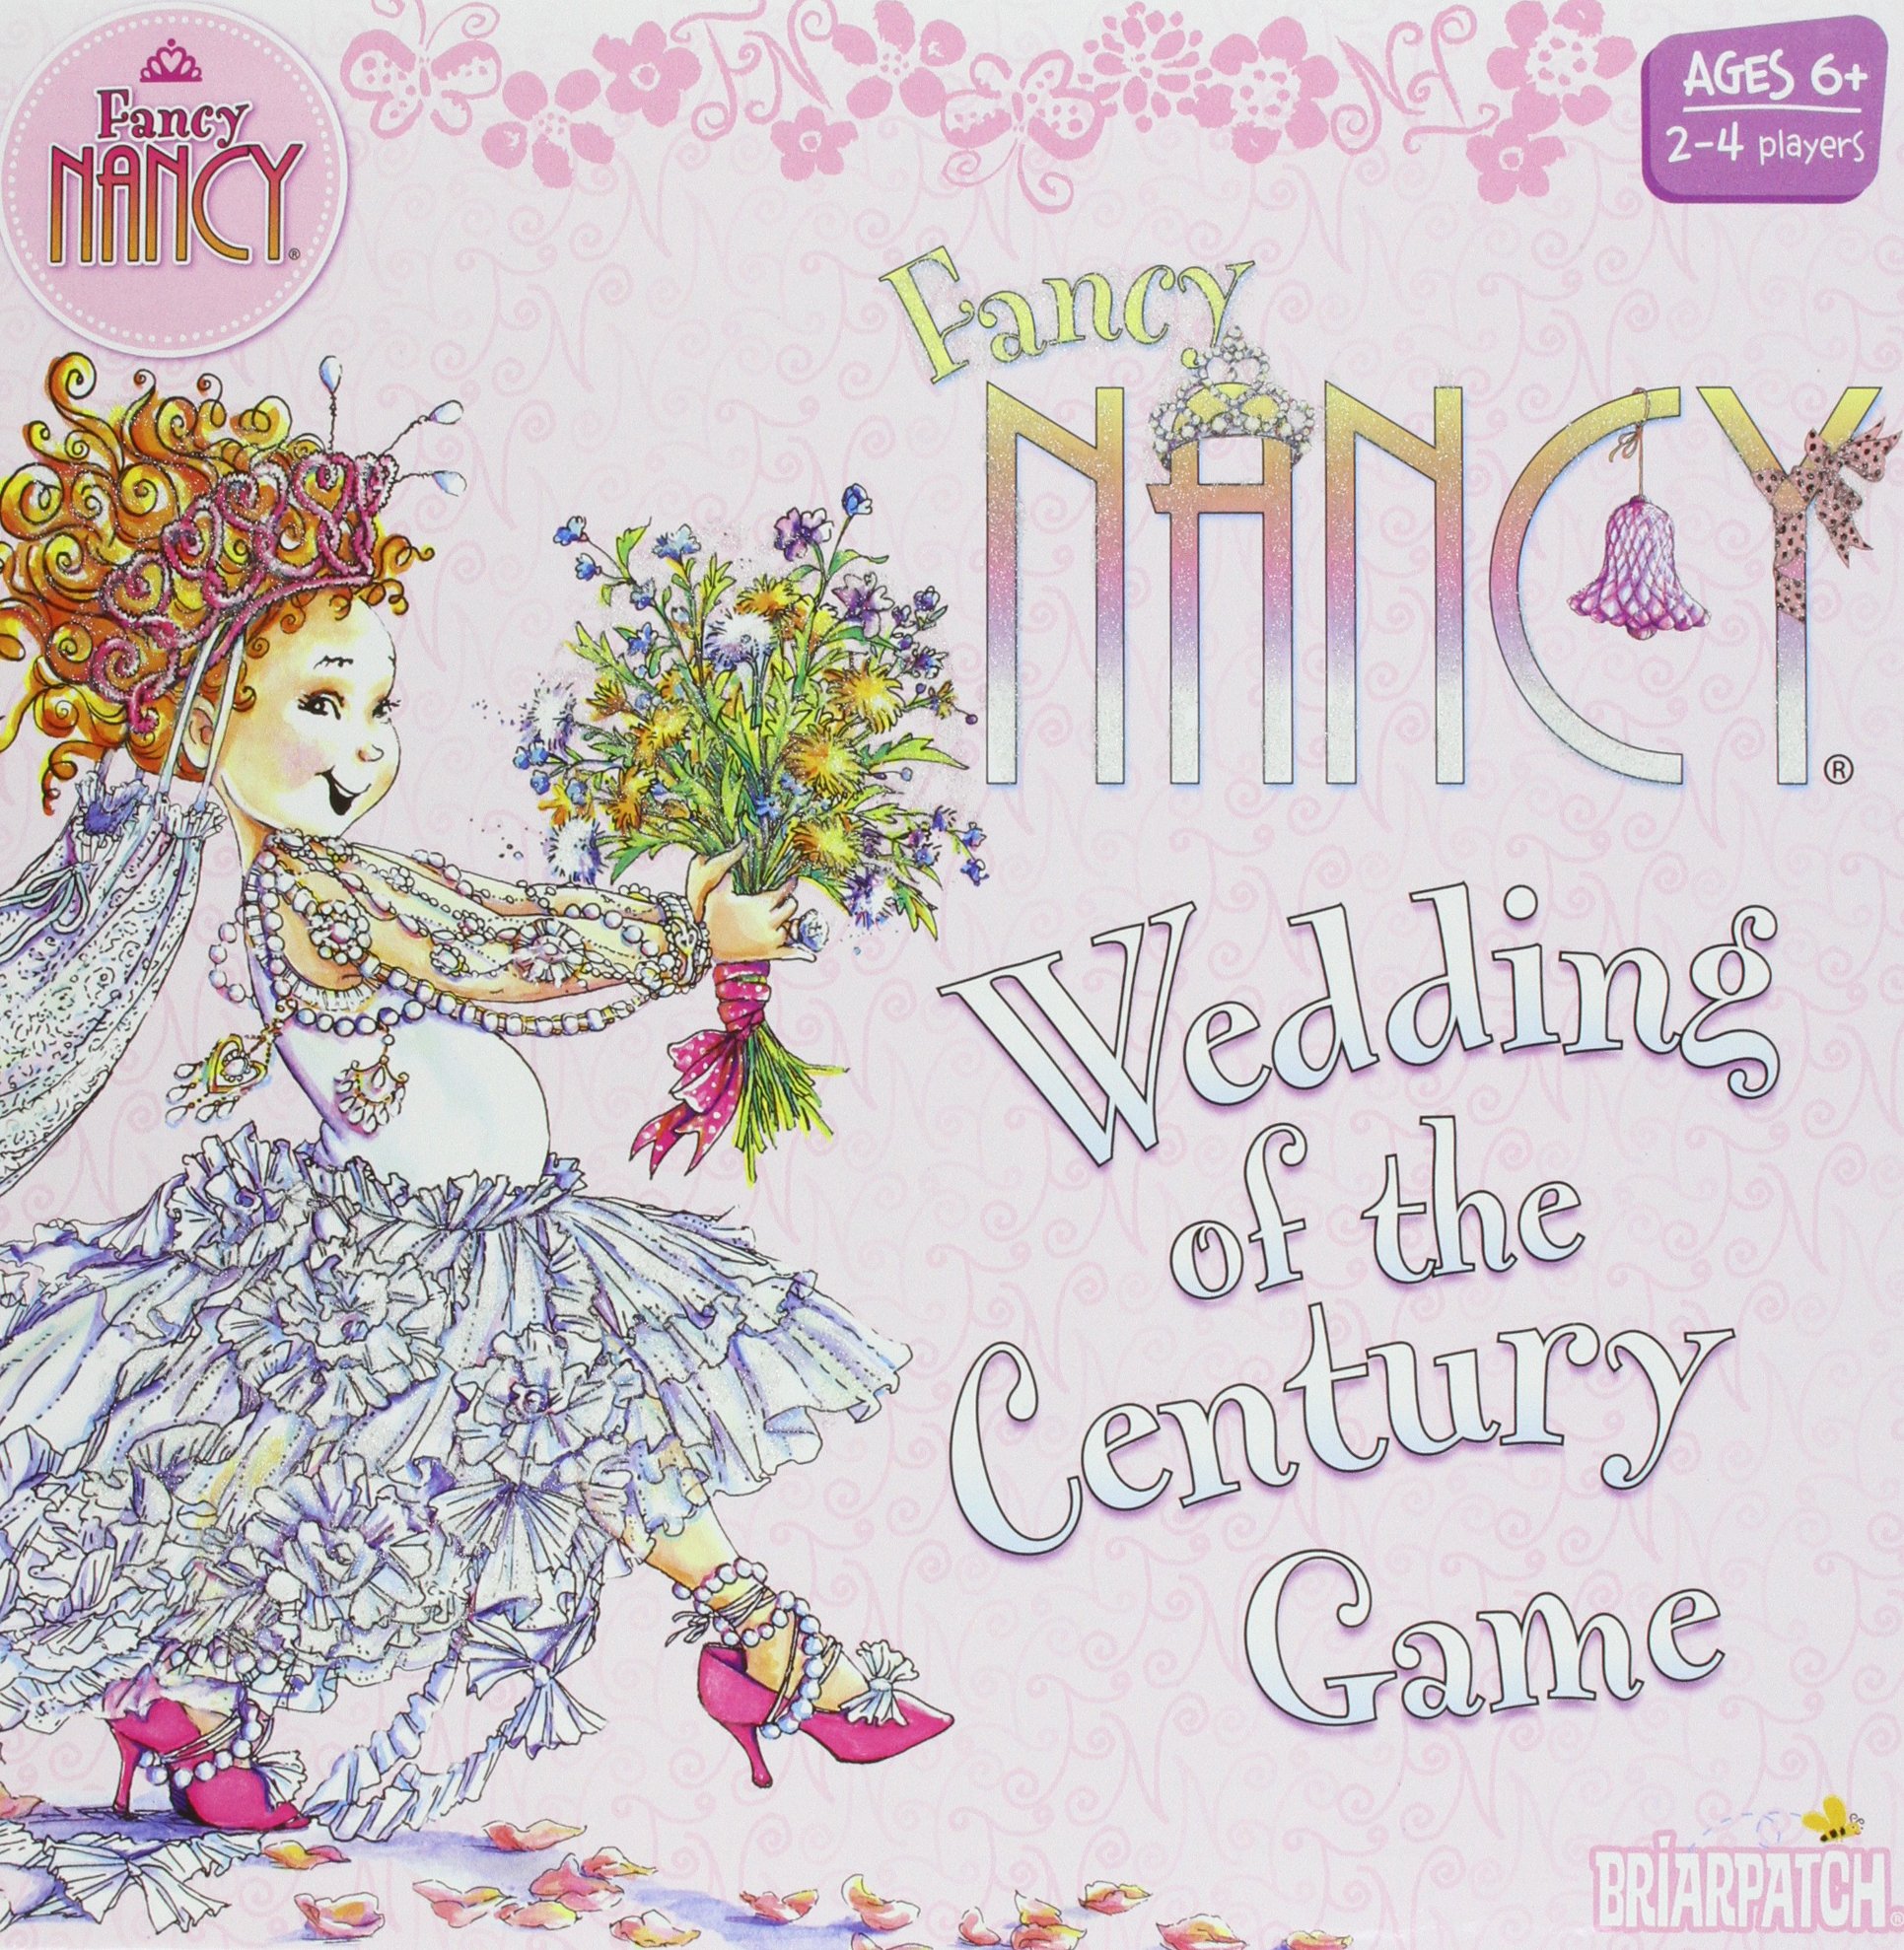 Fancy Nancy and the wedding of the century